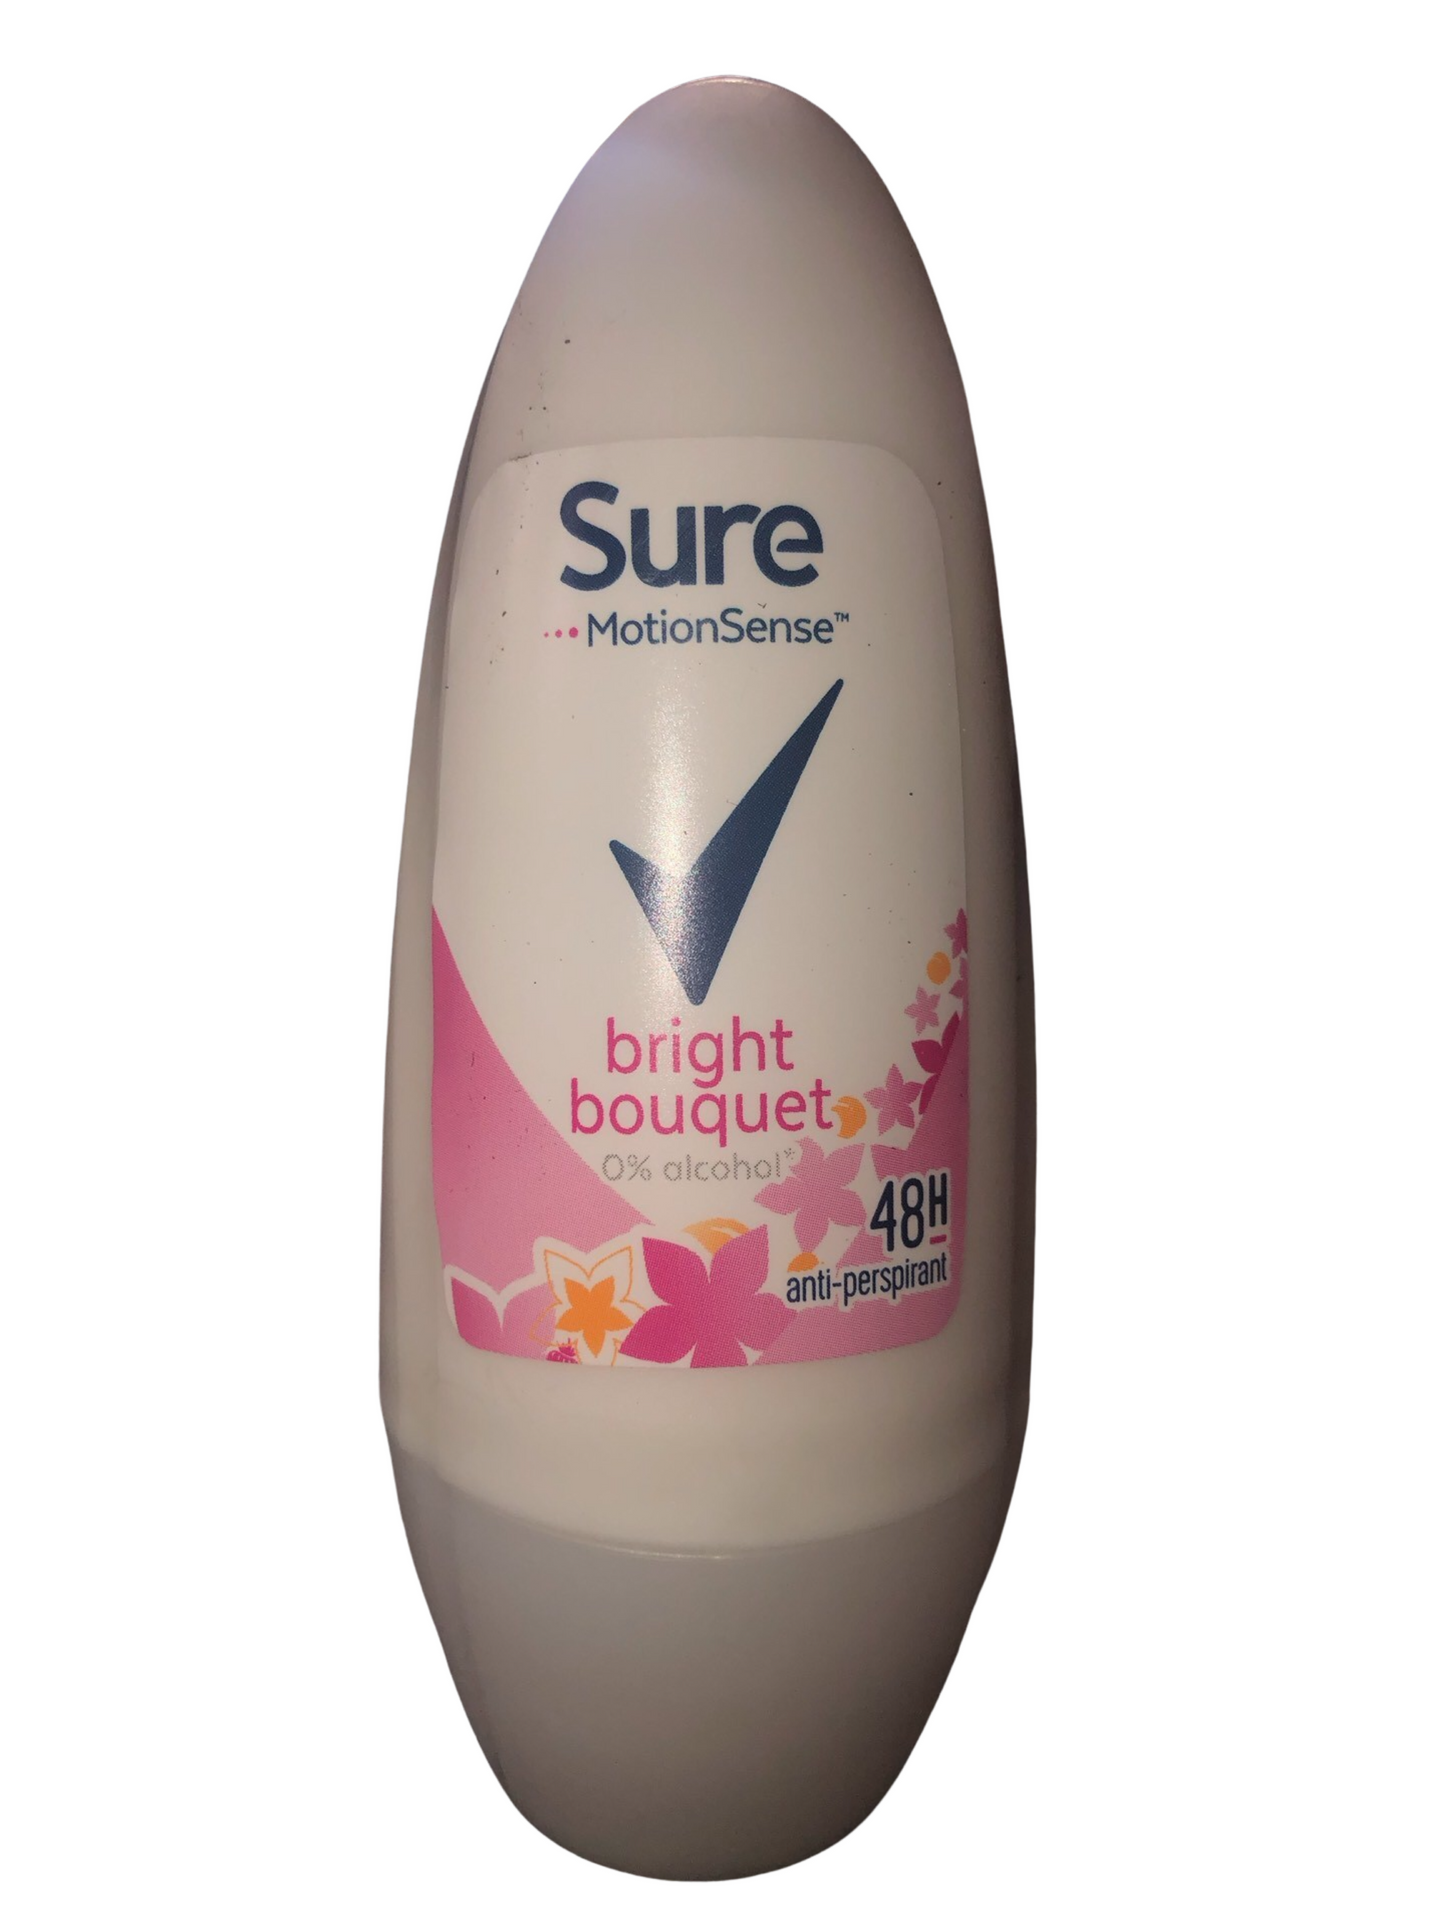 Sure bright bouquet roll on antiperspirant